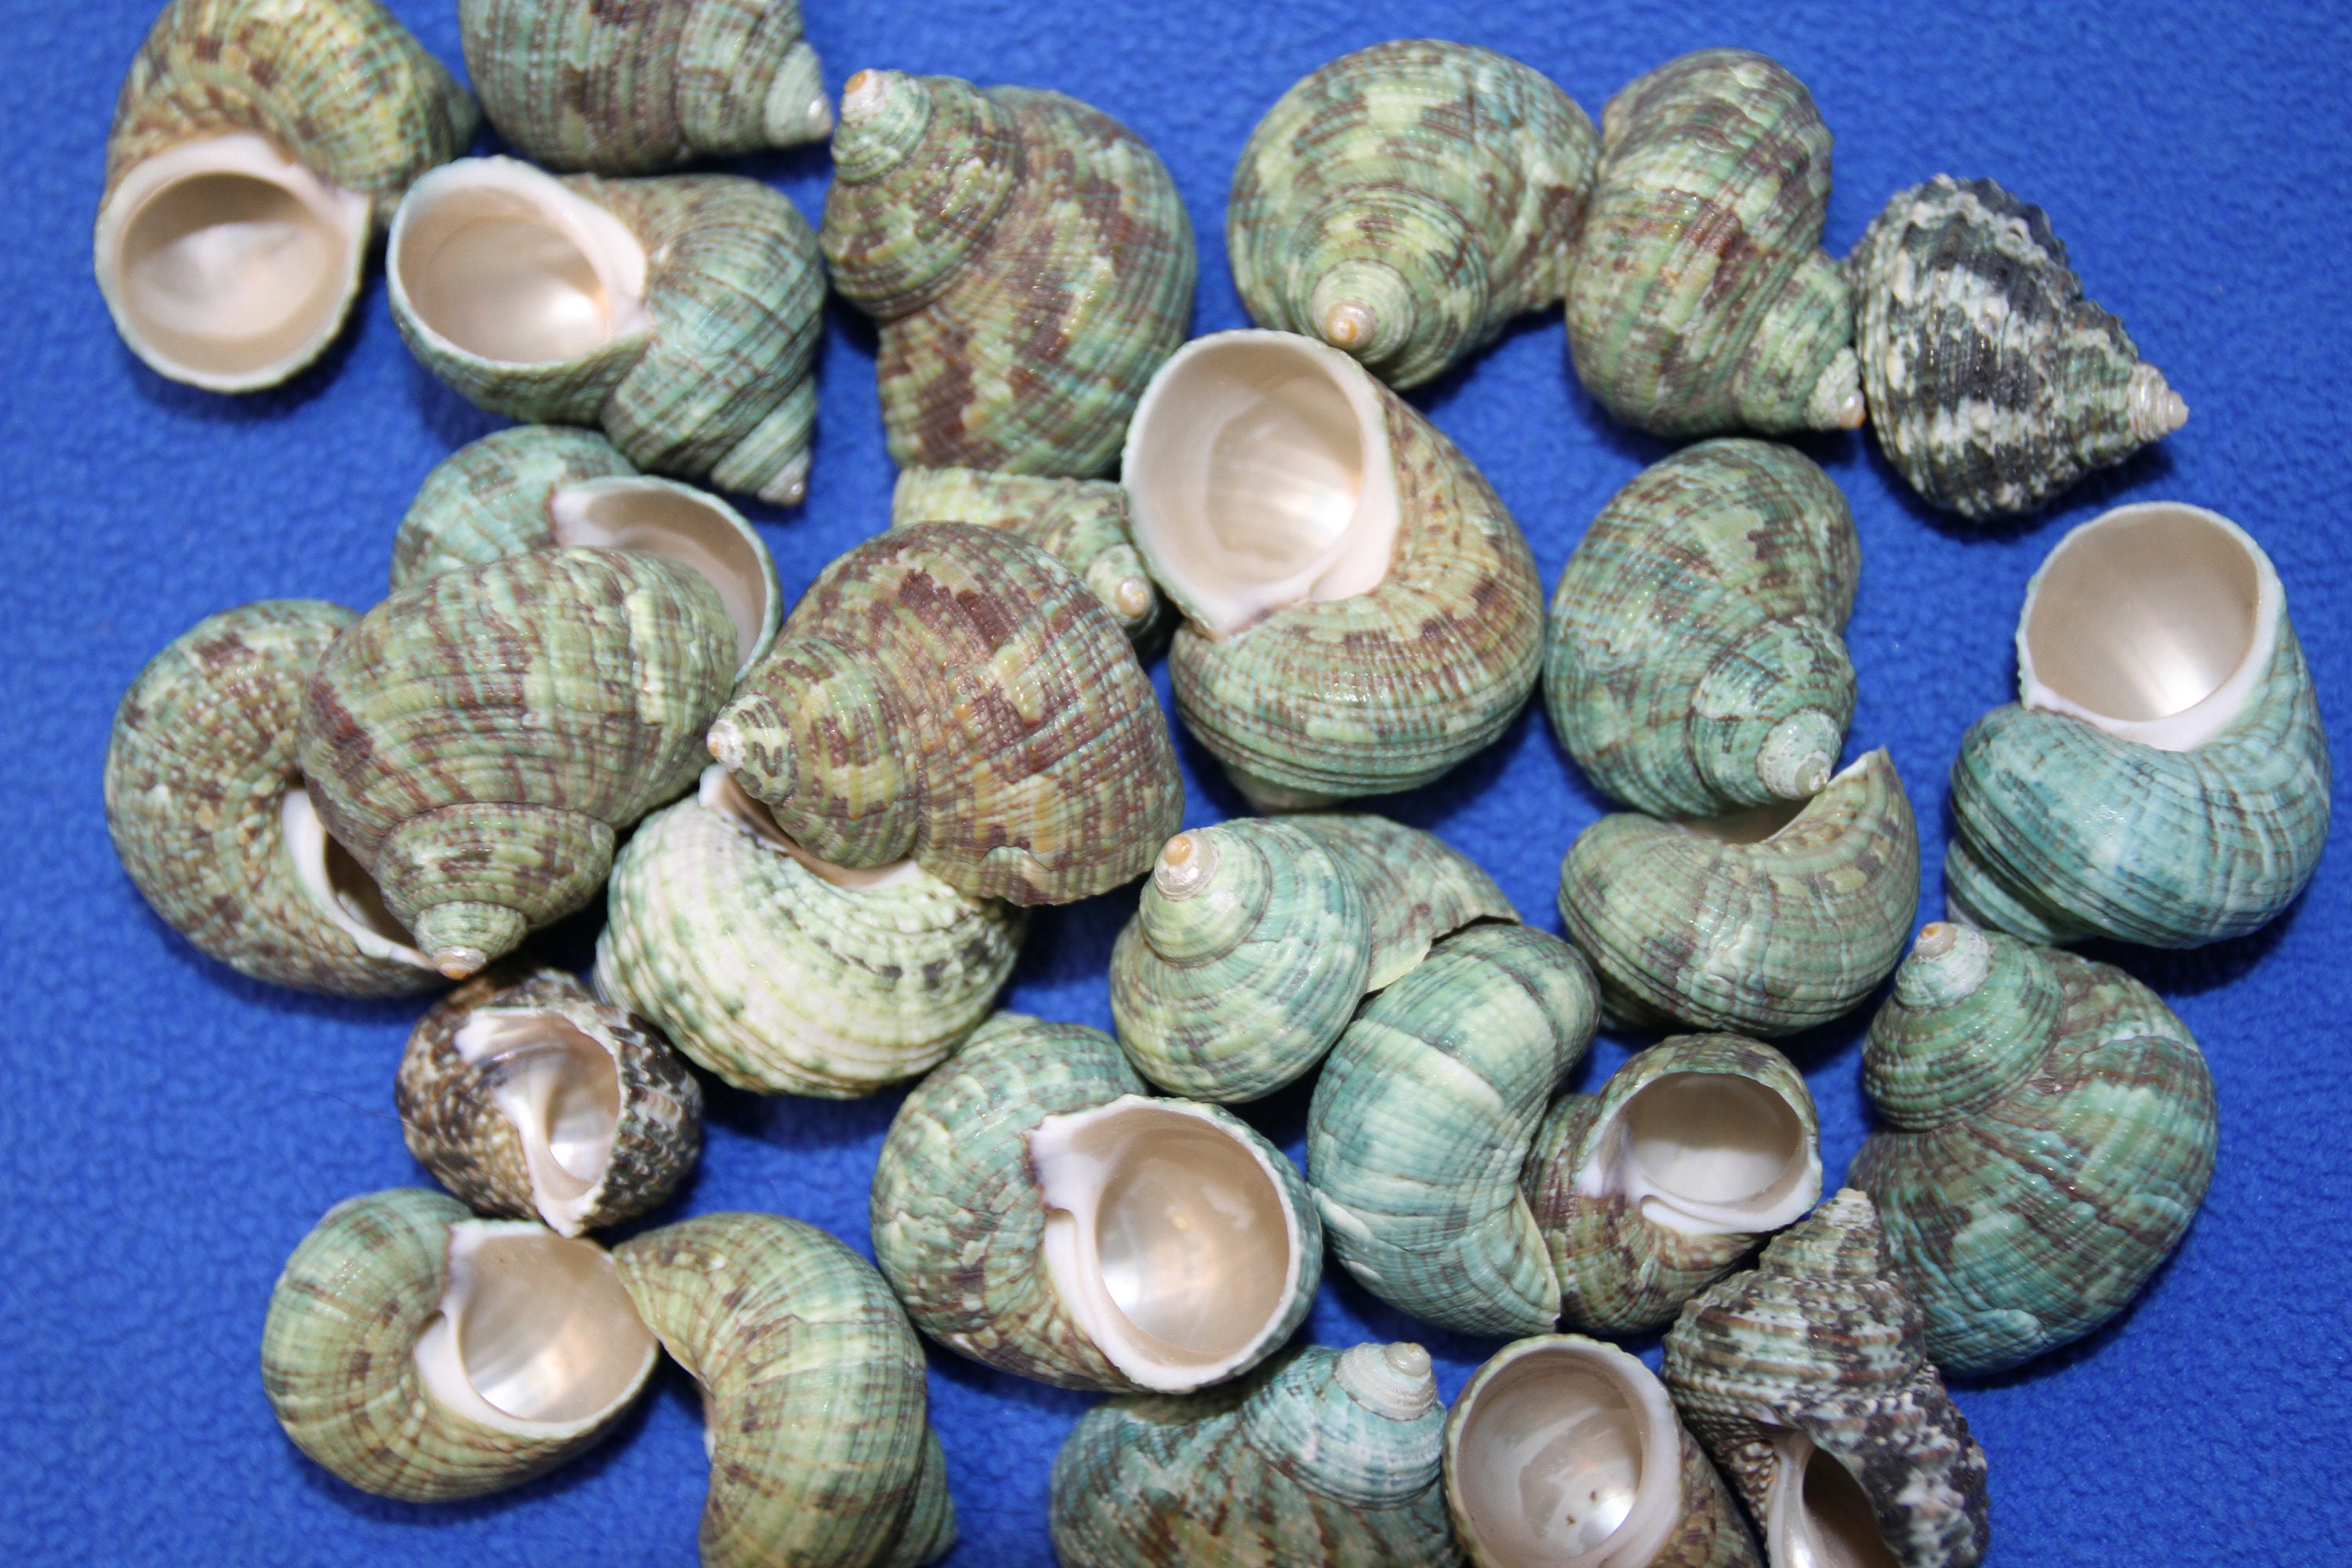 Jade Green Turbo Sea Shells Turbo Brunneus (10 shells approx. 1-2 inches)  Natural Green Shells for Hermit Crab Home, Display & Collecting!